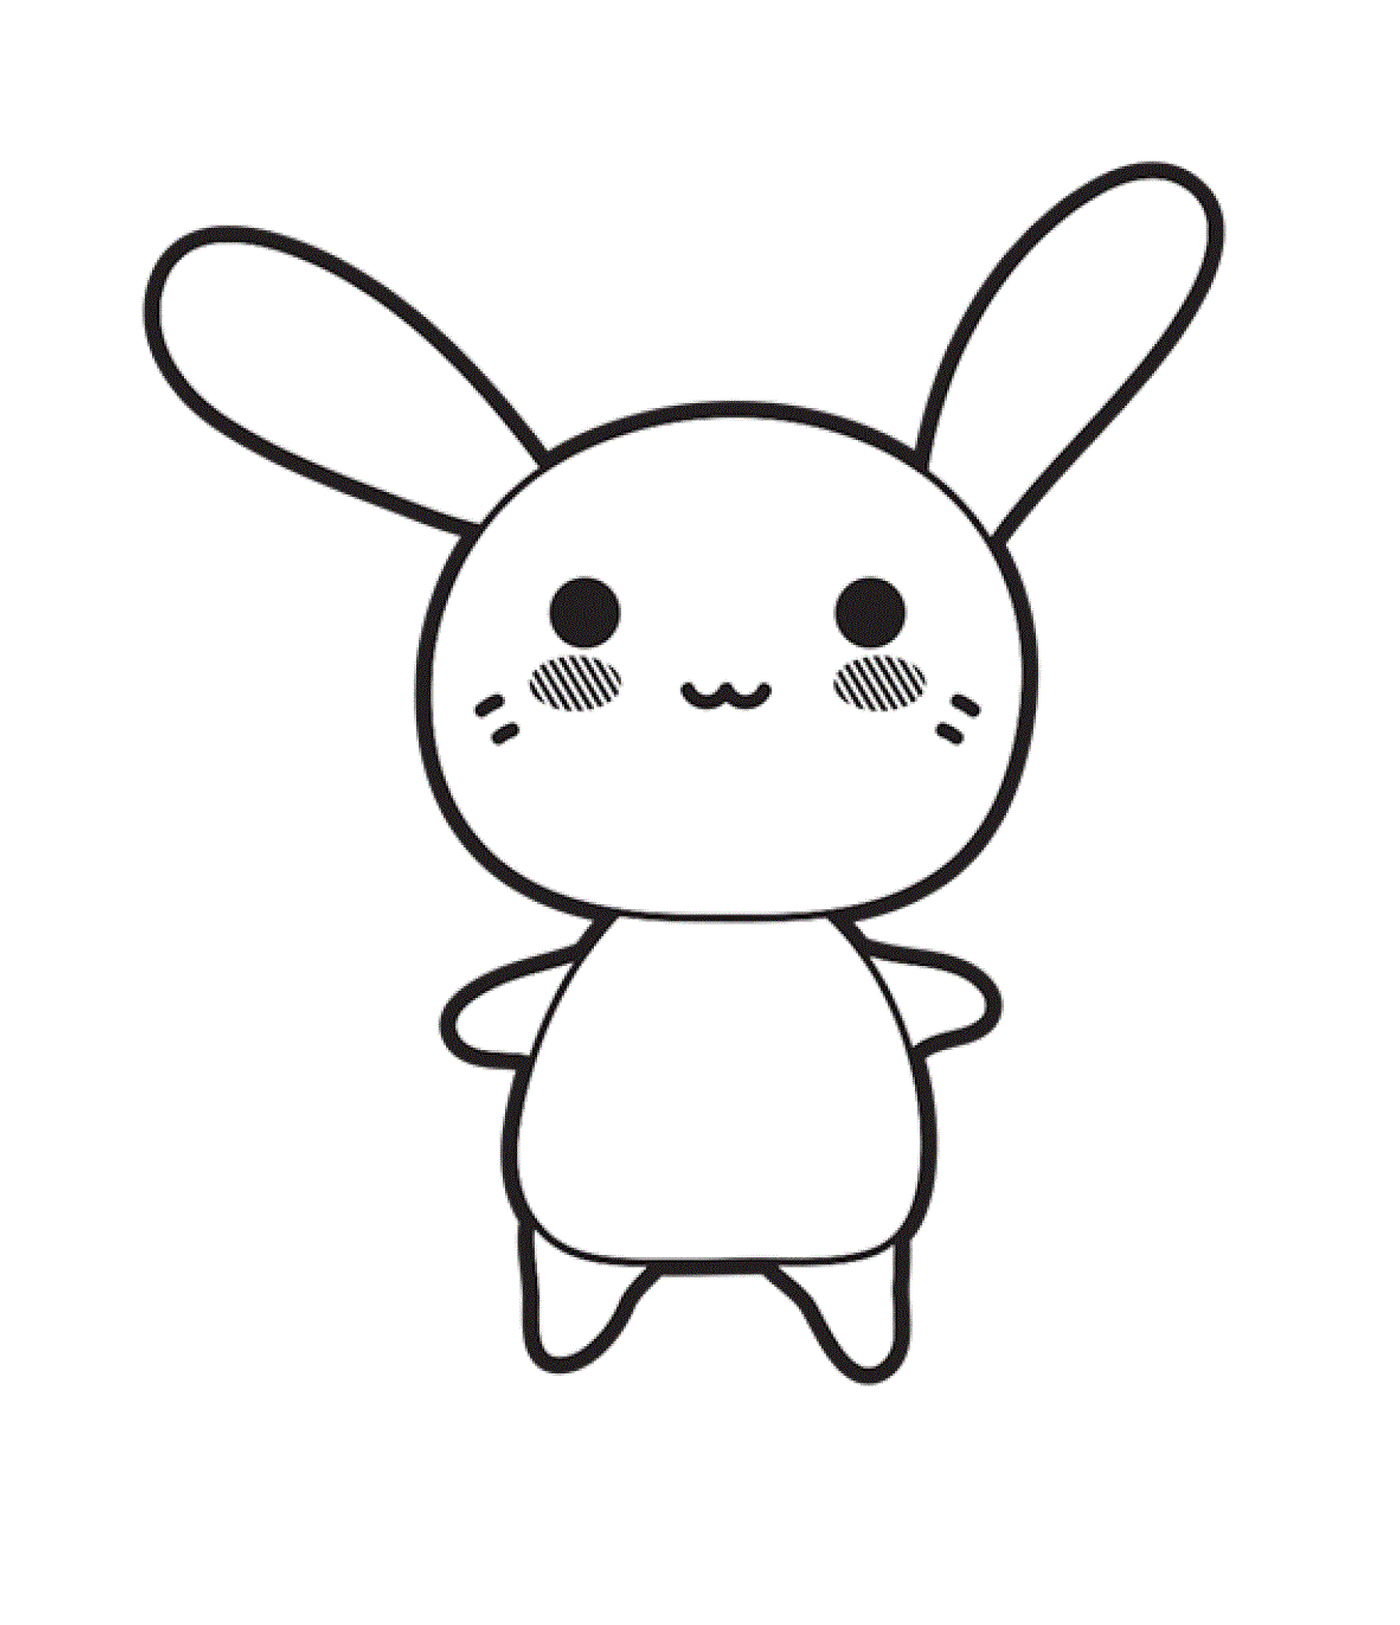  Cute and simple rabbit 